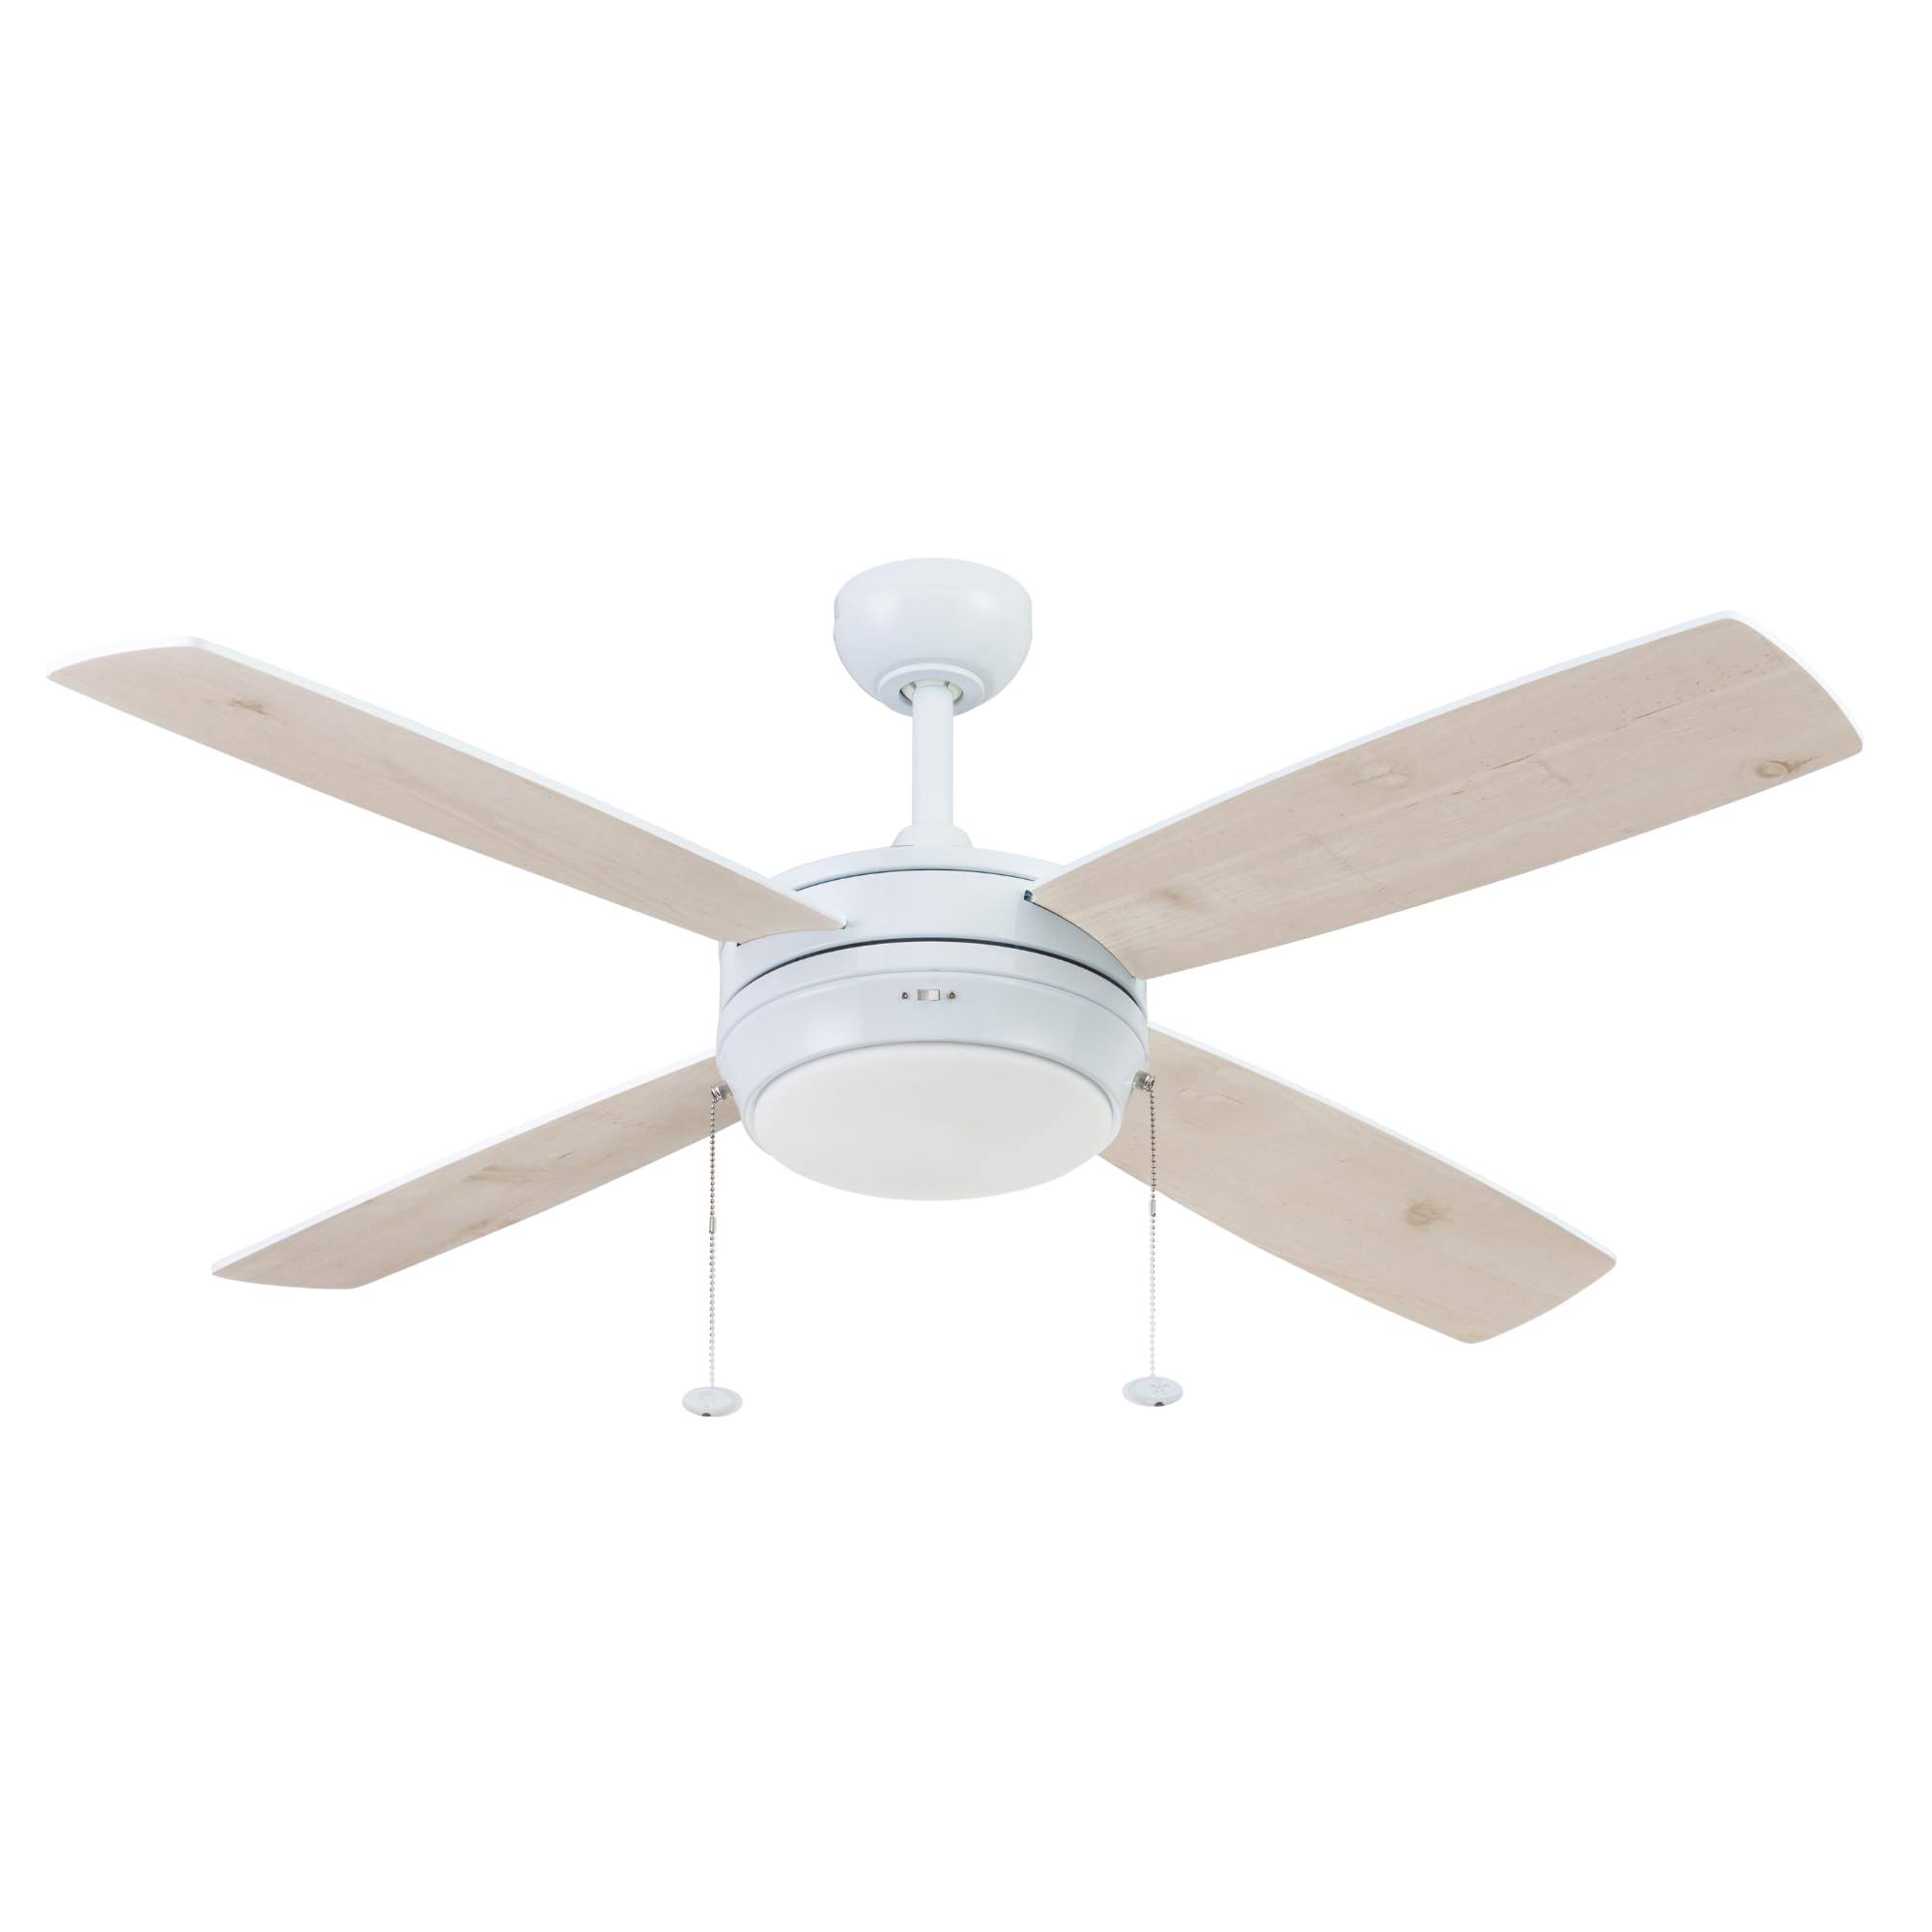 52" Prominence Home Kailani Ceiling Fan, Bright White